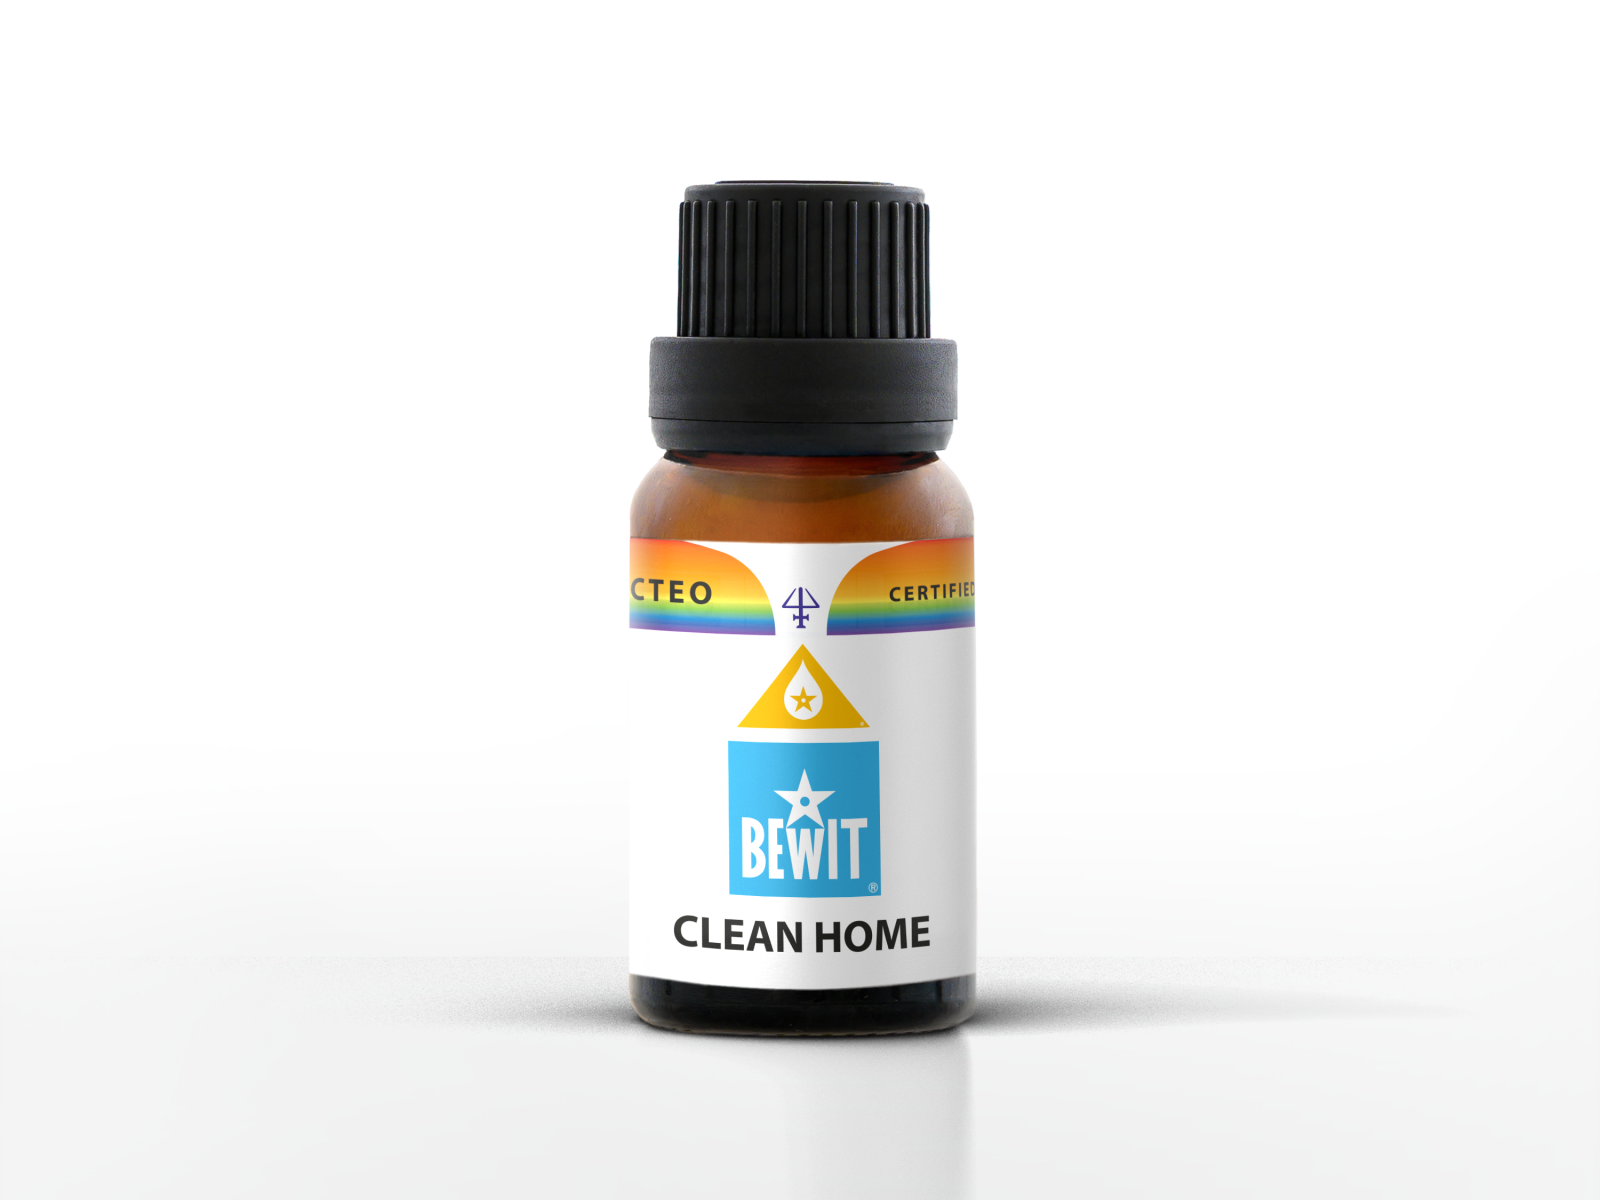 BEWIT CLEAN HOME - Blend of essential oils - 1